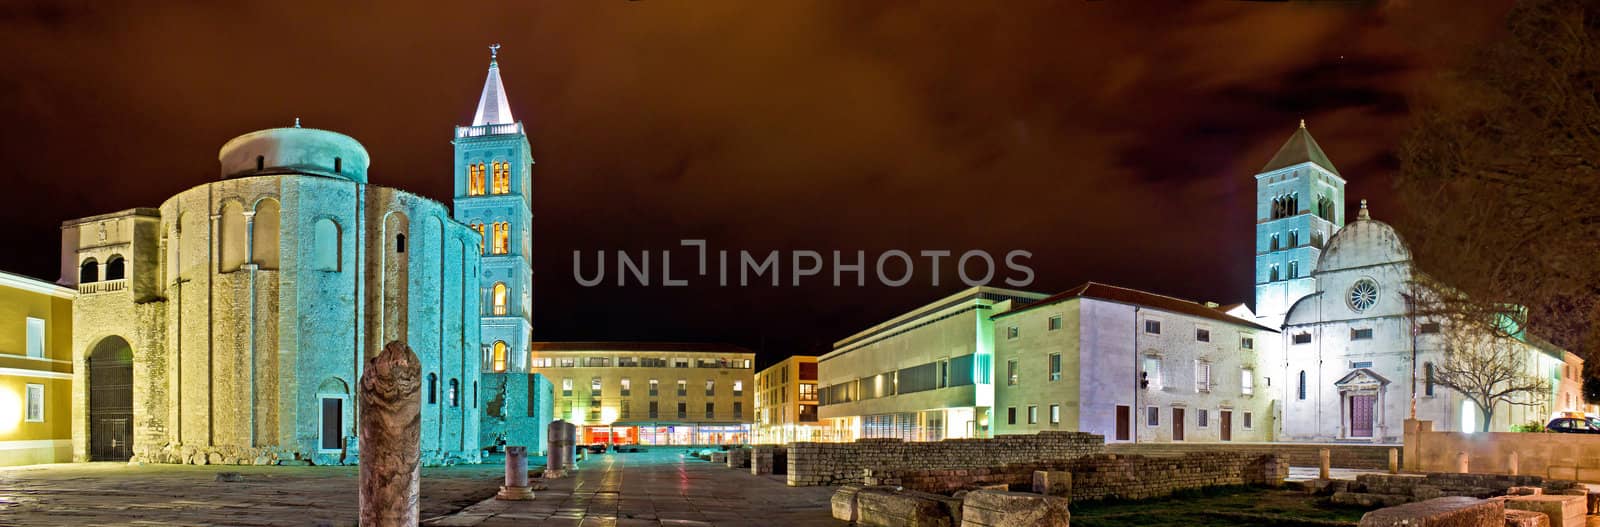 Old Zadar square panoramic night view by xbrchx